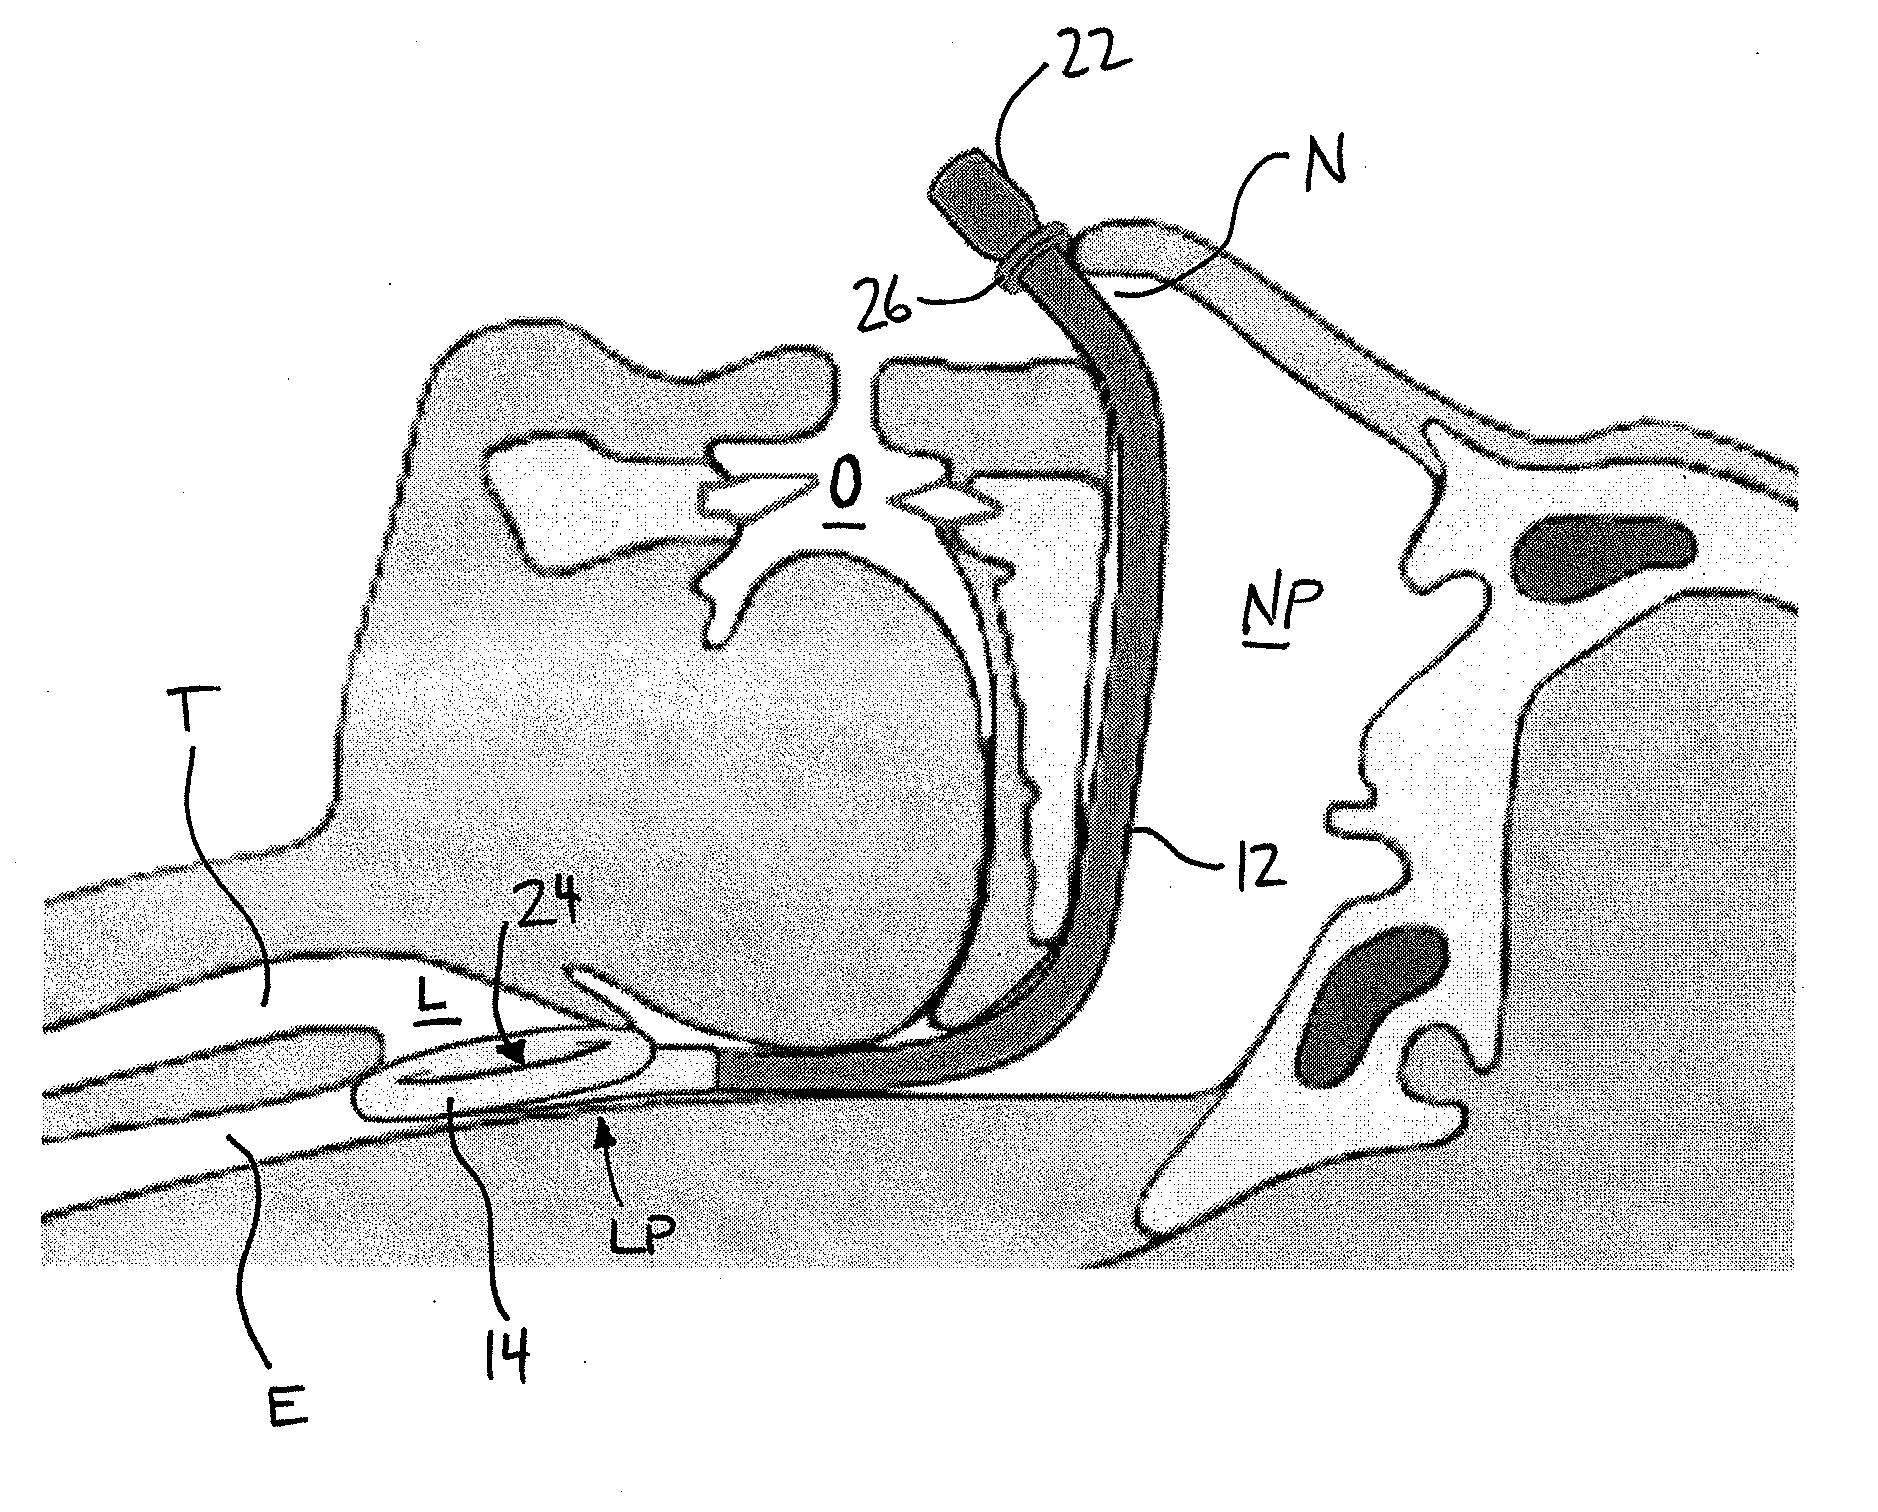 Nasal airway management device with inflatable supraglottic laryngeal cuff